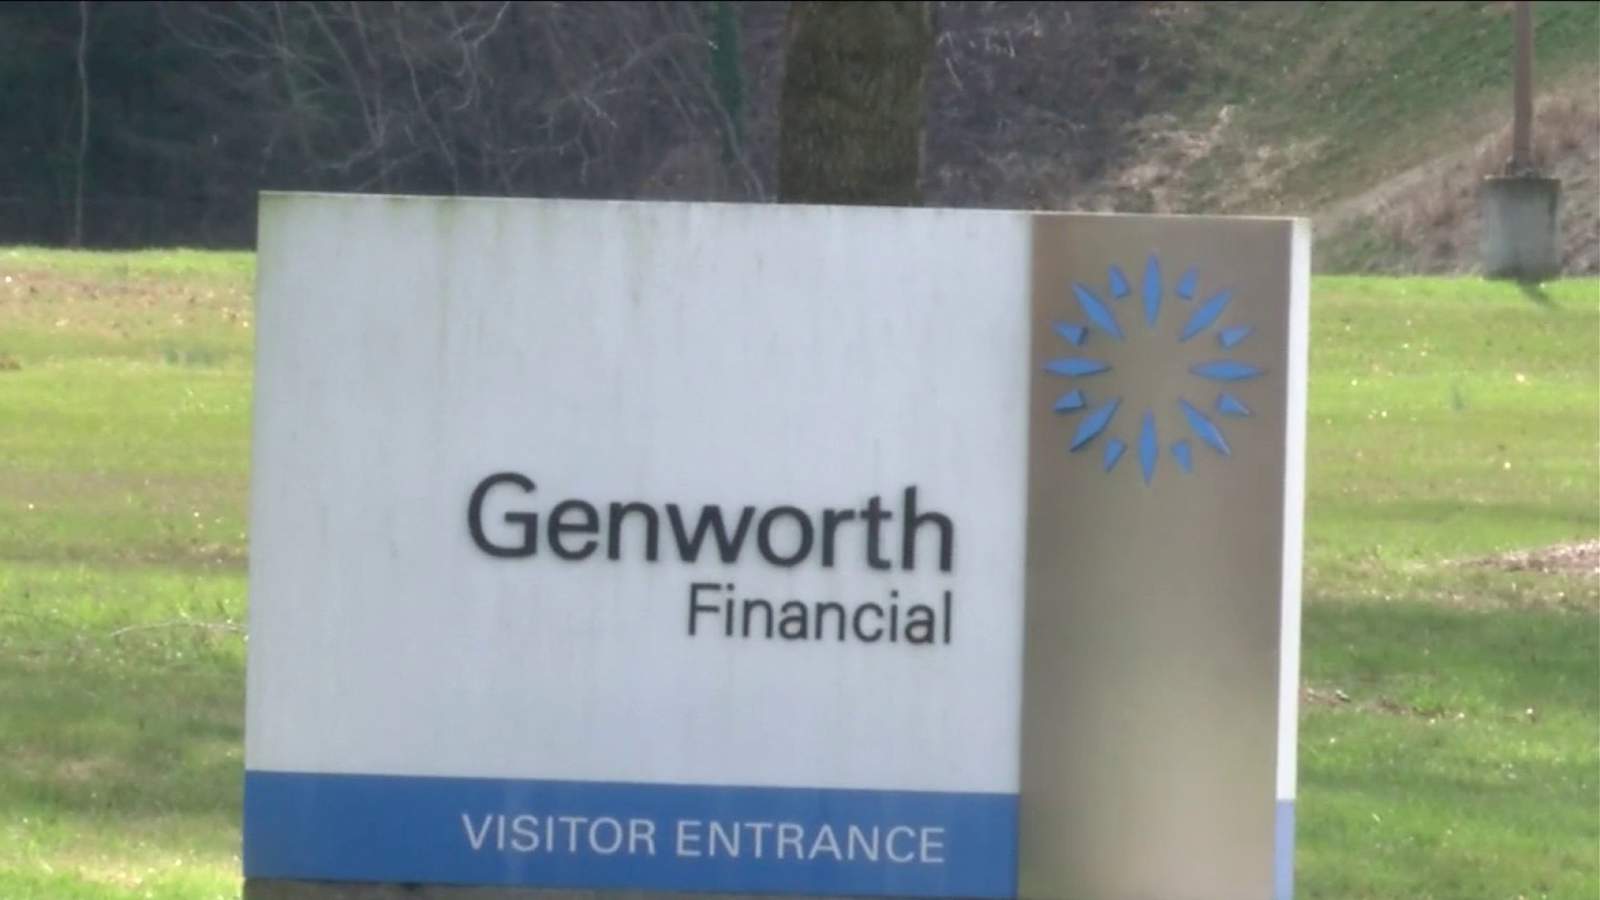 Genworth Financial in Lynchburg sent home after one employee had ‘cold-like symptoms’